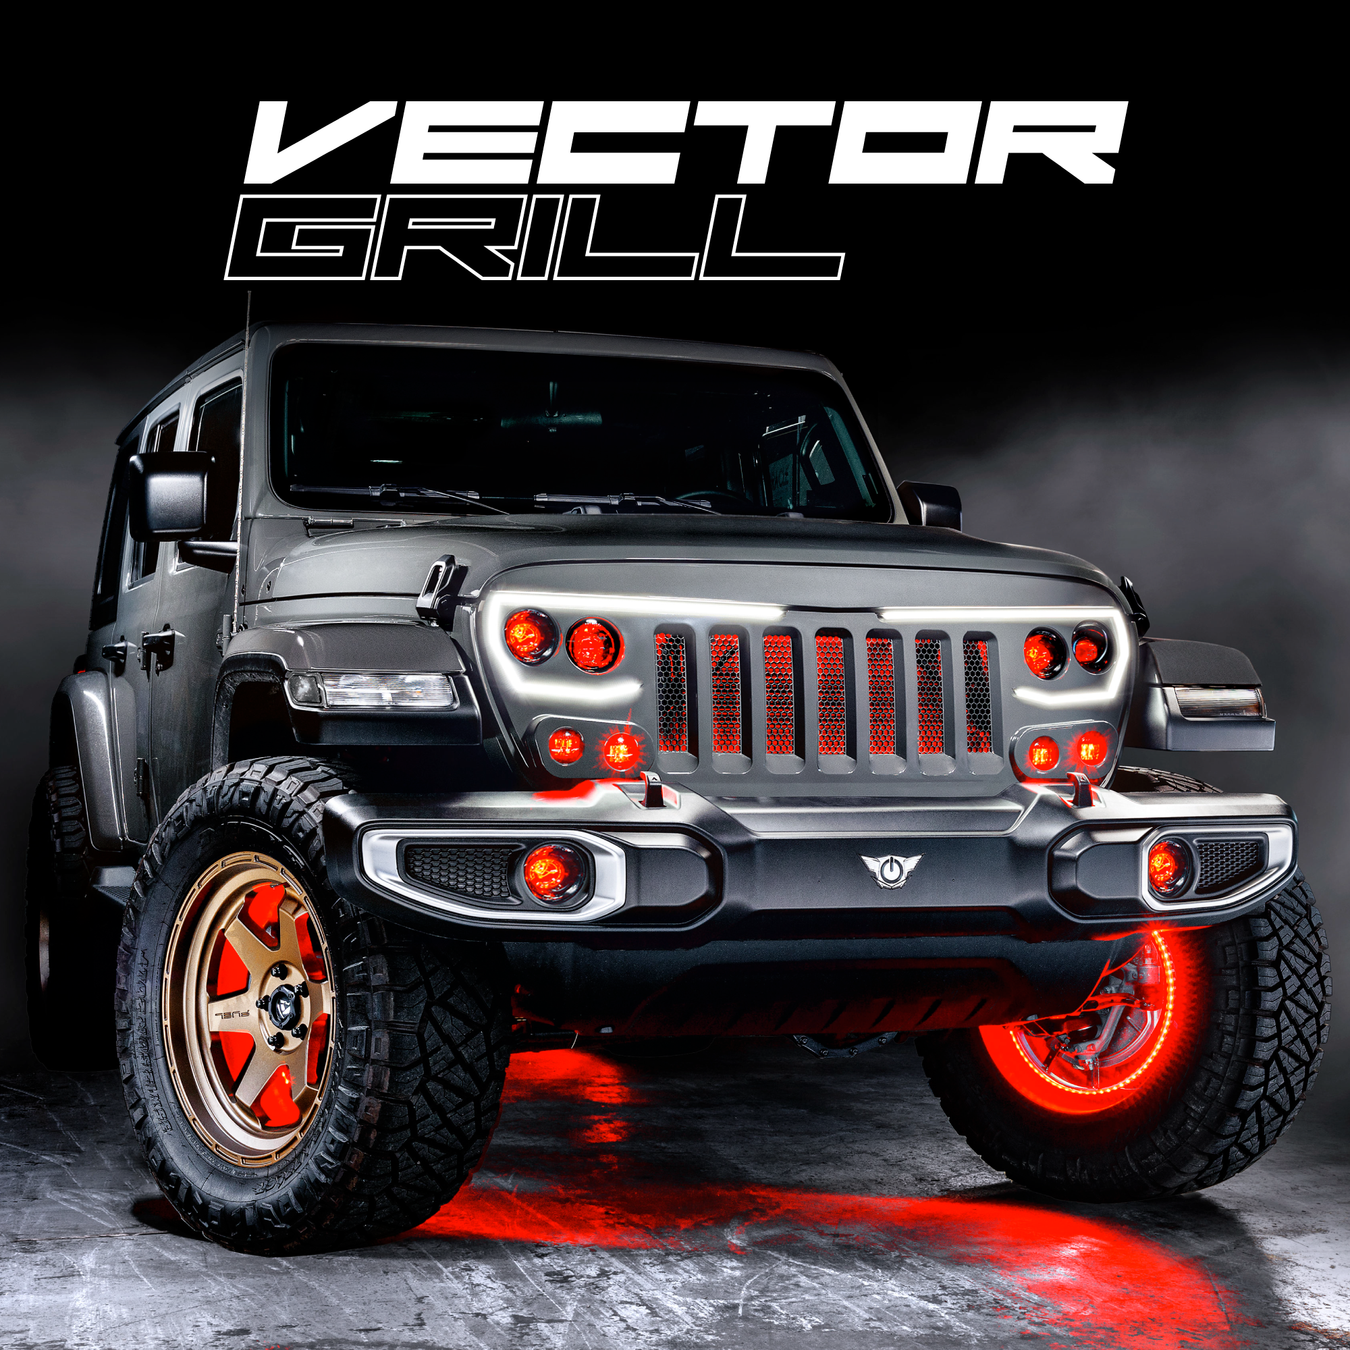 Vector™ Grill Series